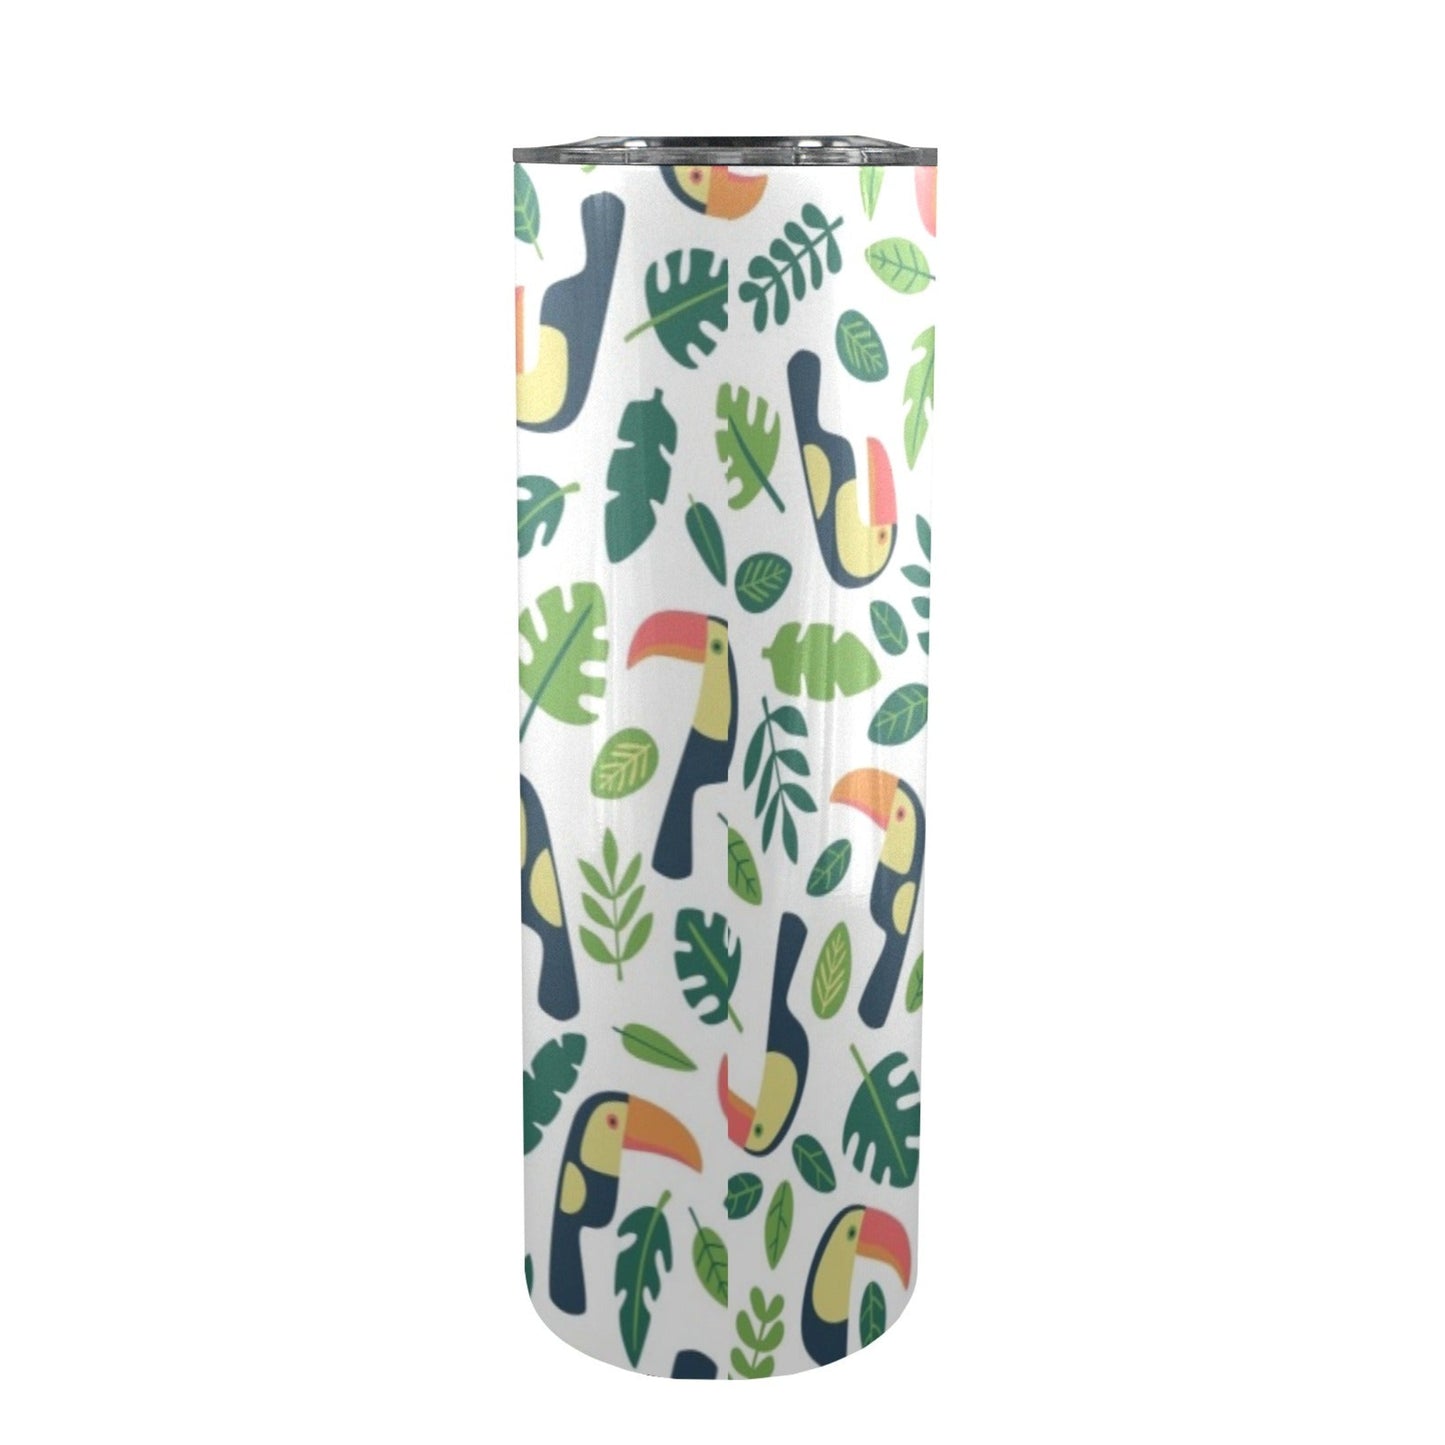 Toucans - 20oz Tall Skinny Tumbler with Lid and Straw 20oz Tall Skinny Tumbler with Lid and Straw